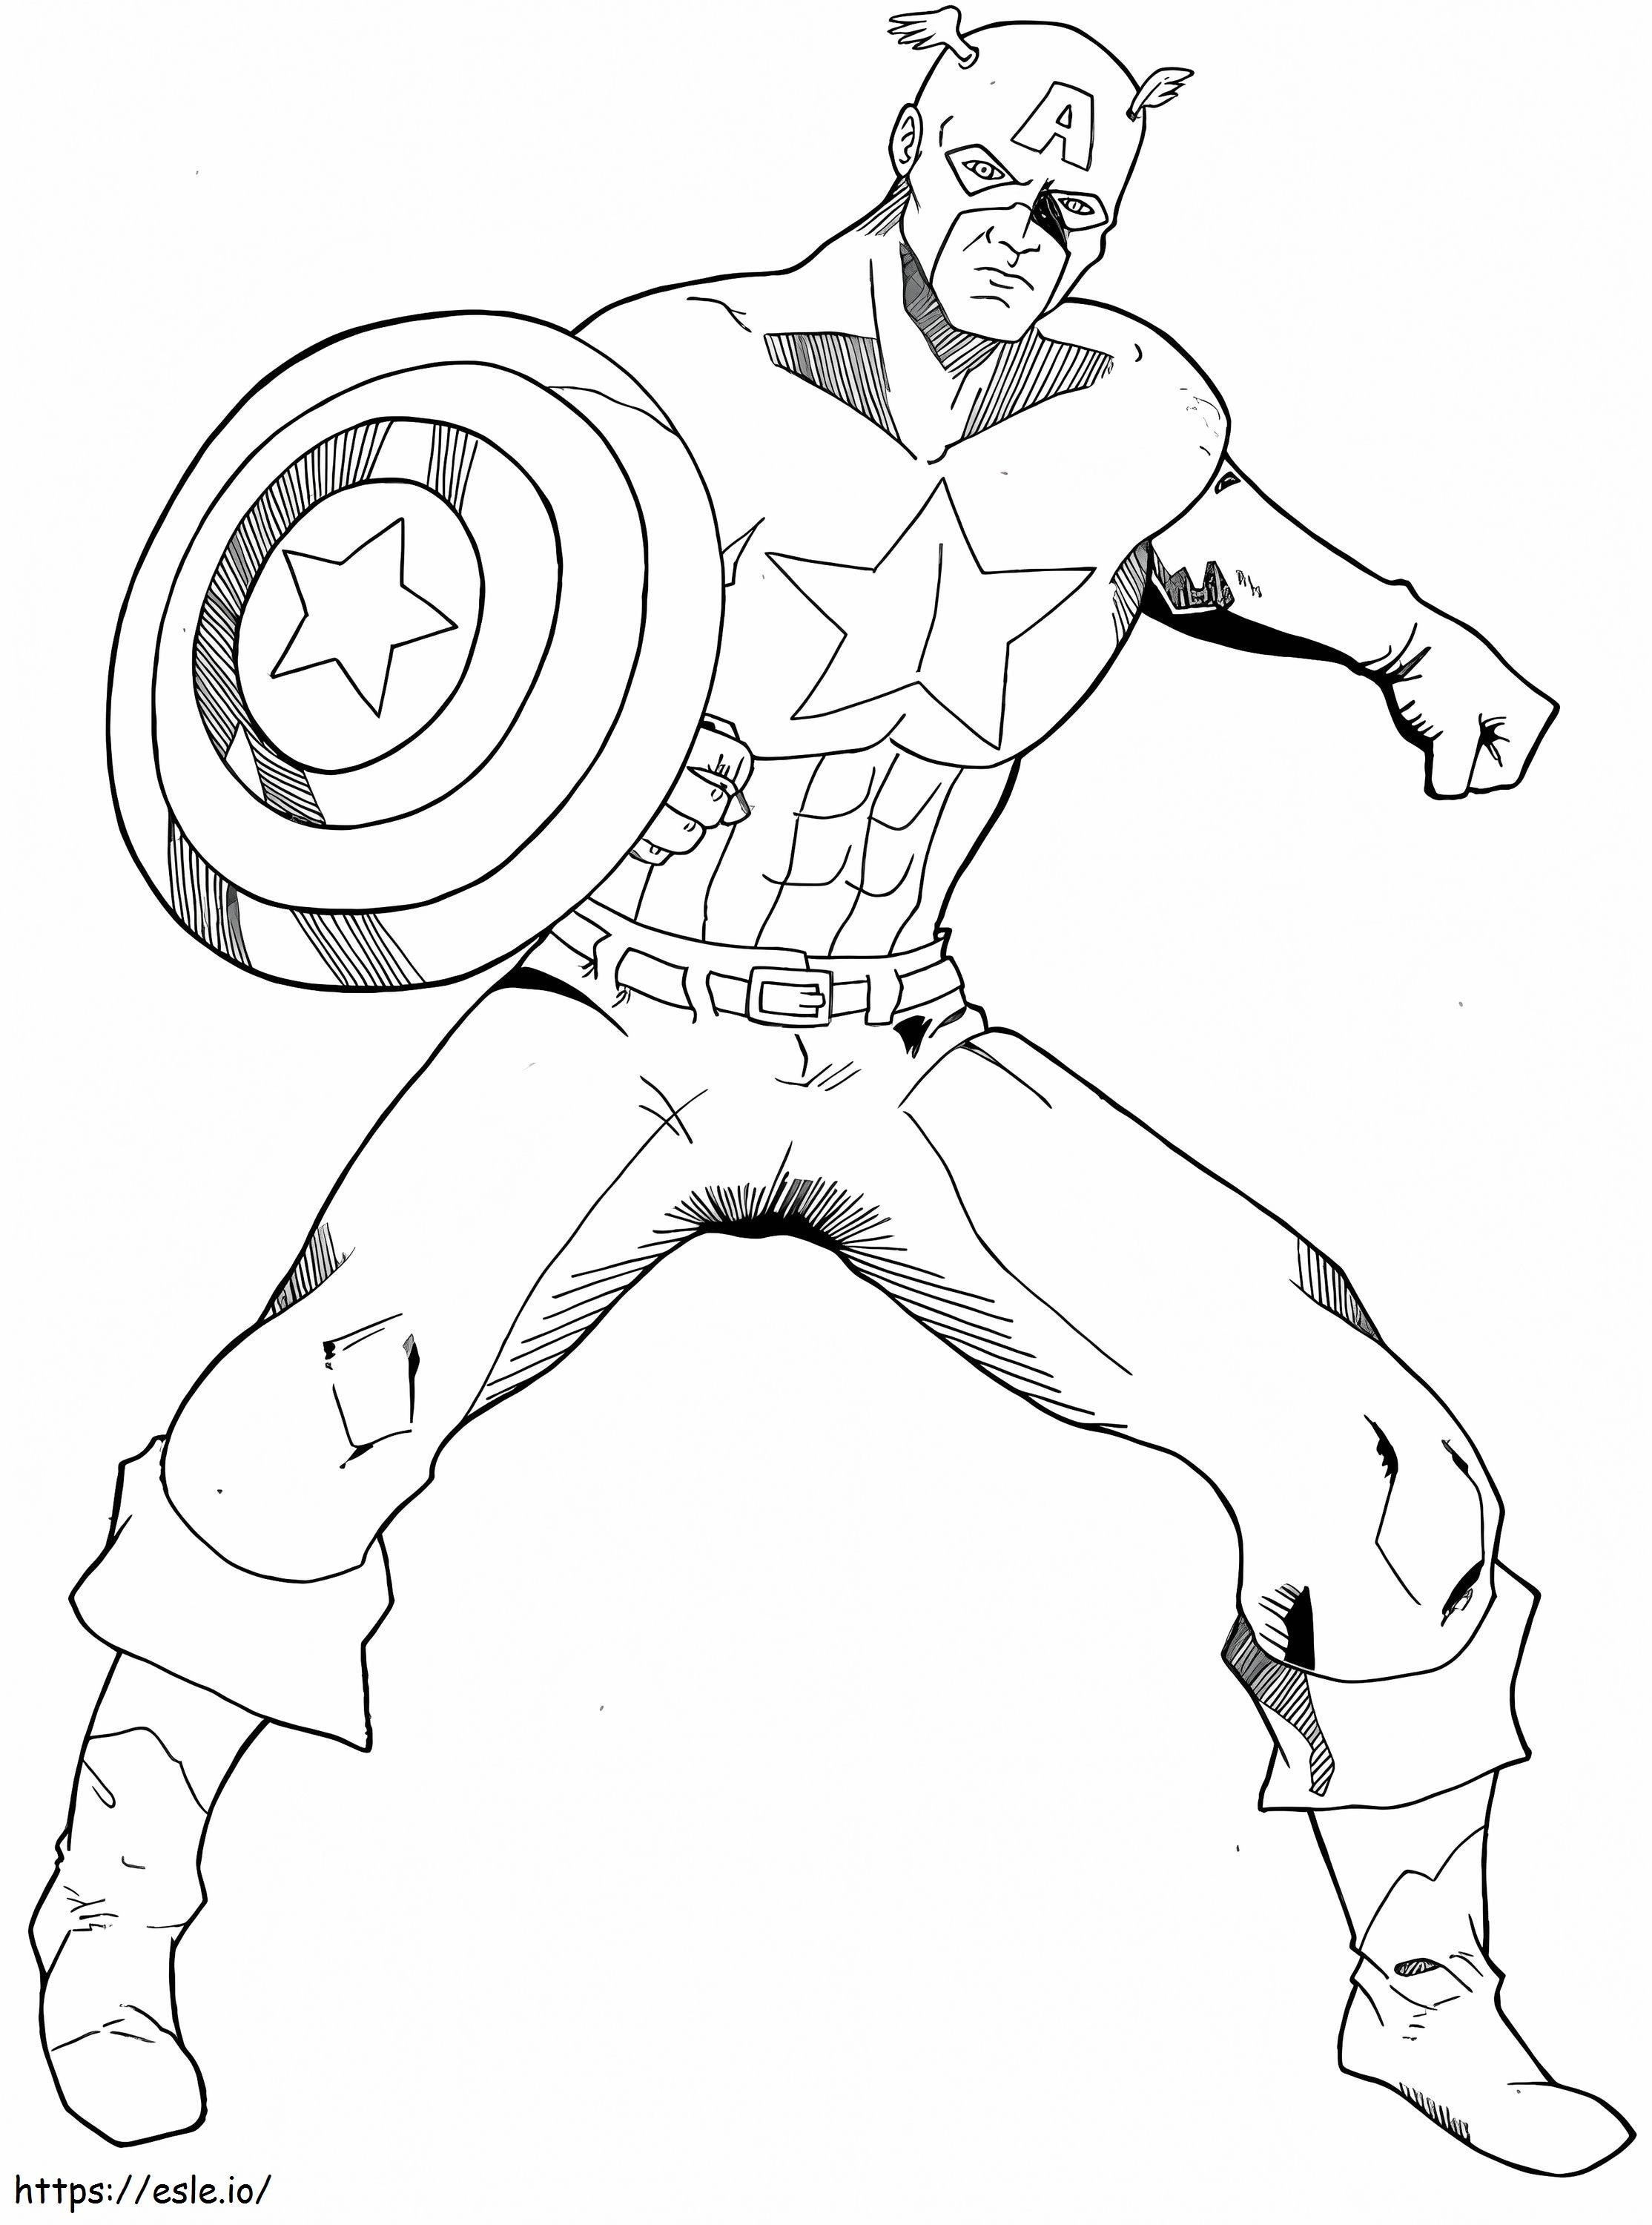 Captain America In Combat coloring page